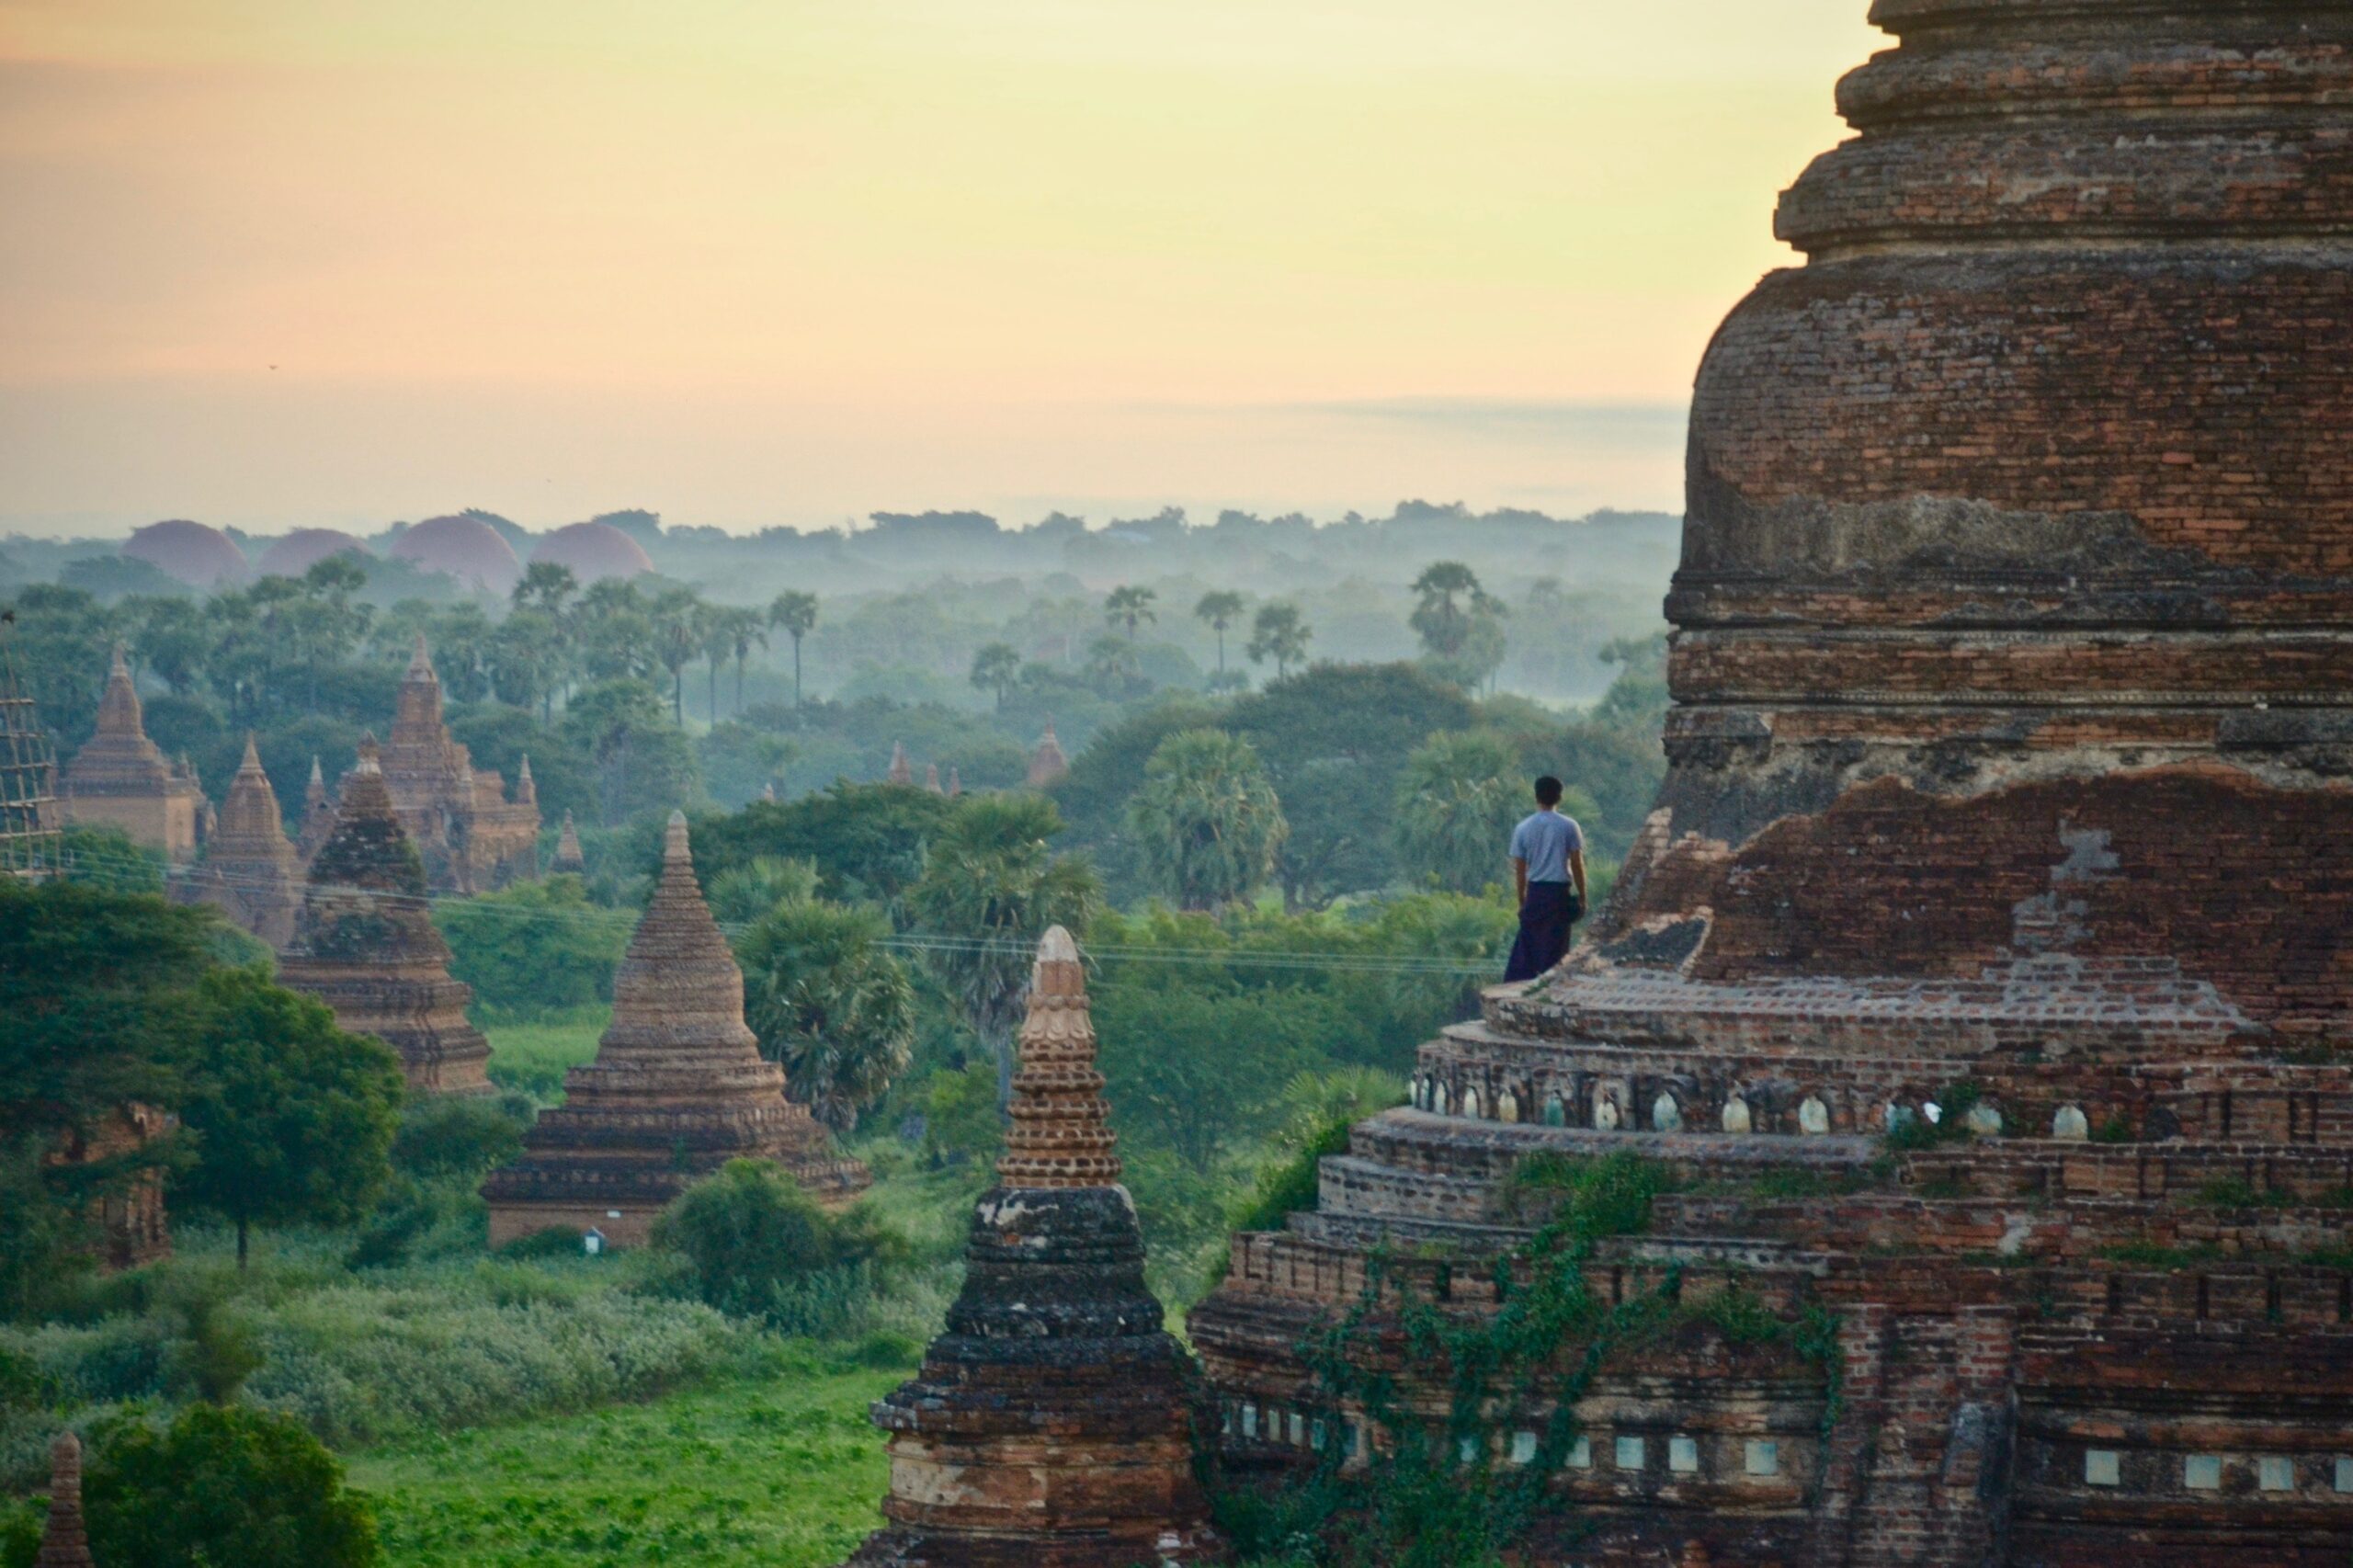 Man stands on one of the temples of Bagan, a testament to Burmese culture